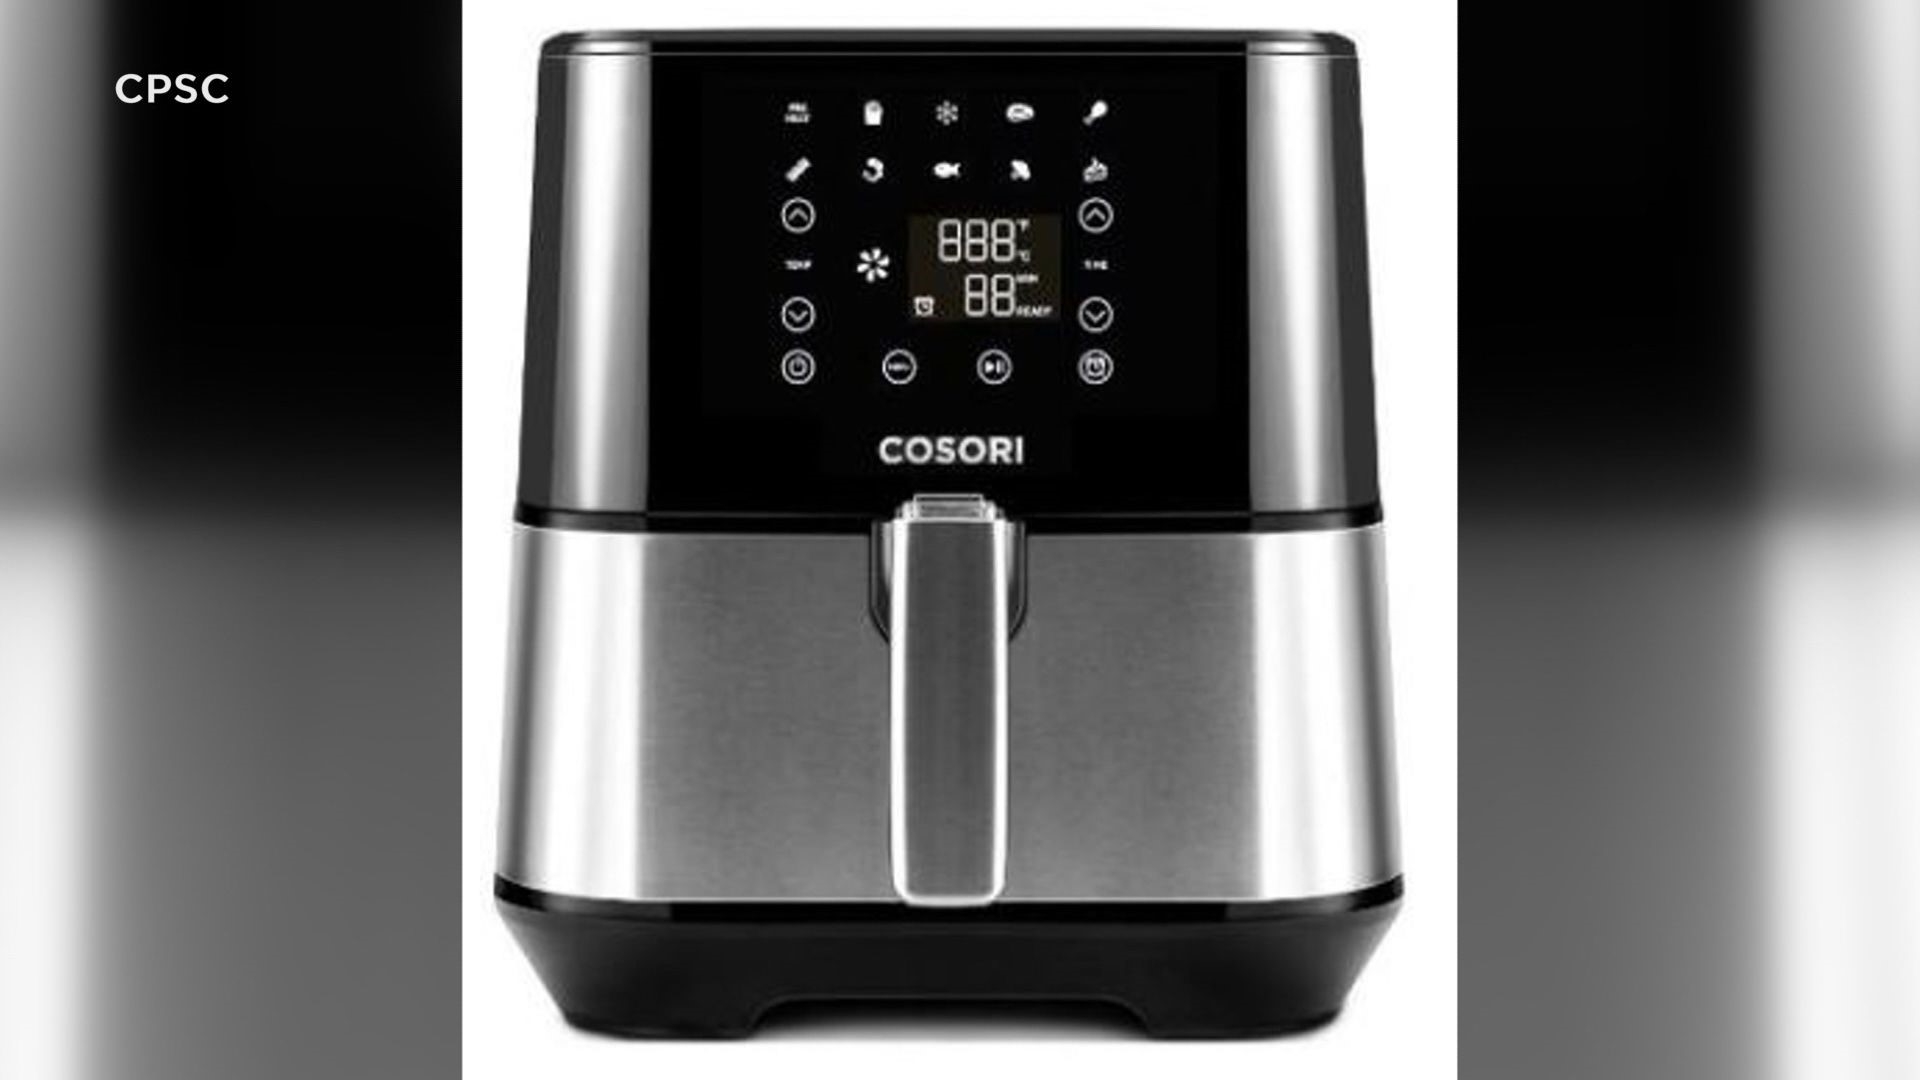 Certain models of Cosori brand air fryers have been recalled in the U.S., Canada and Mexico. They can overheat and start a fire.